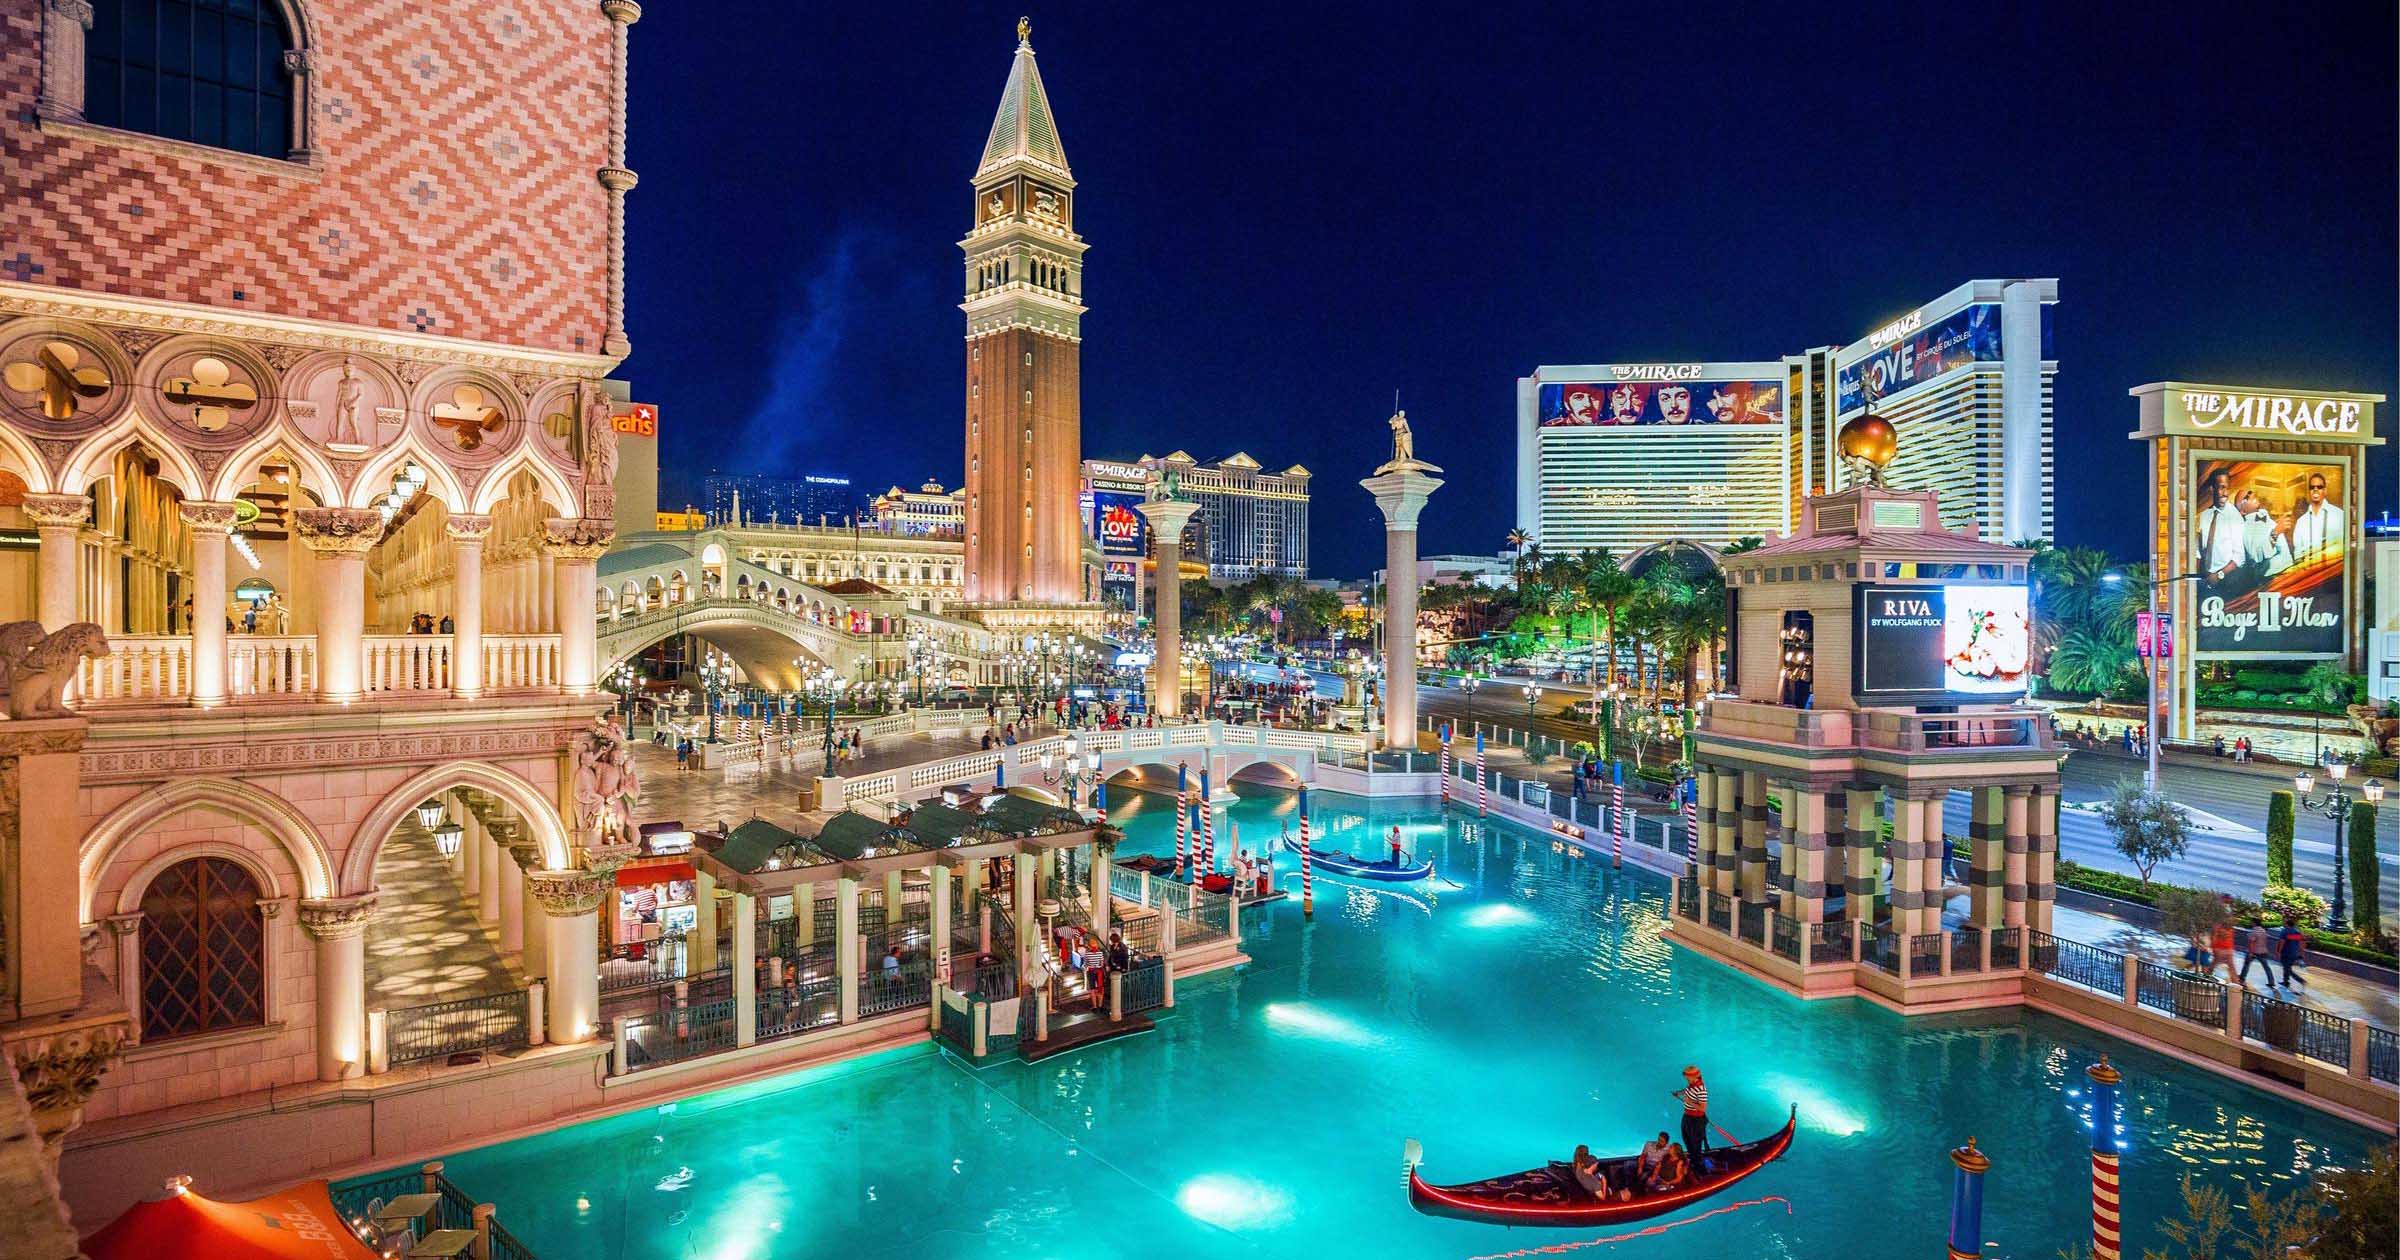 Venetian Las Vegas hotels - Together with Palazzo, arguably the most imposing casino on the Strip